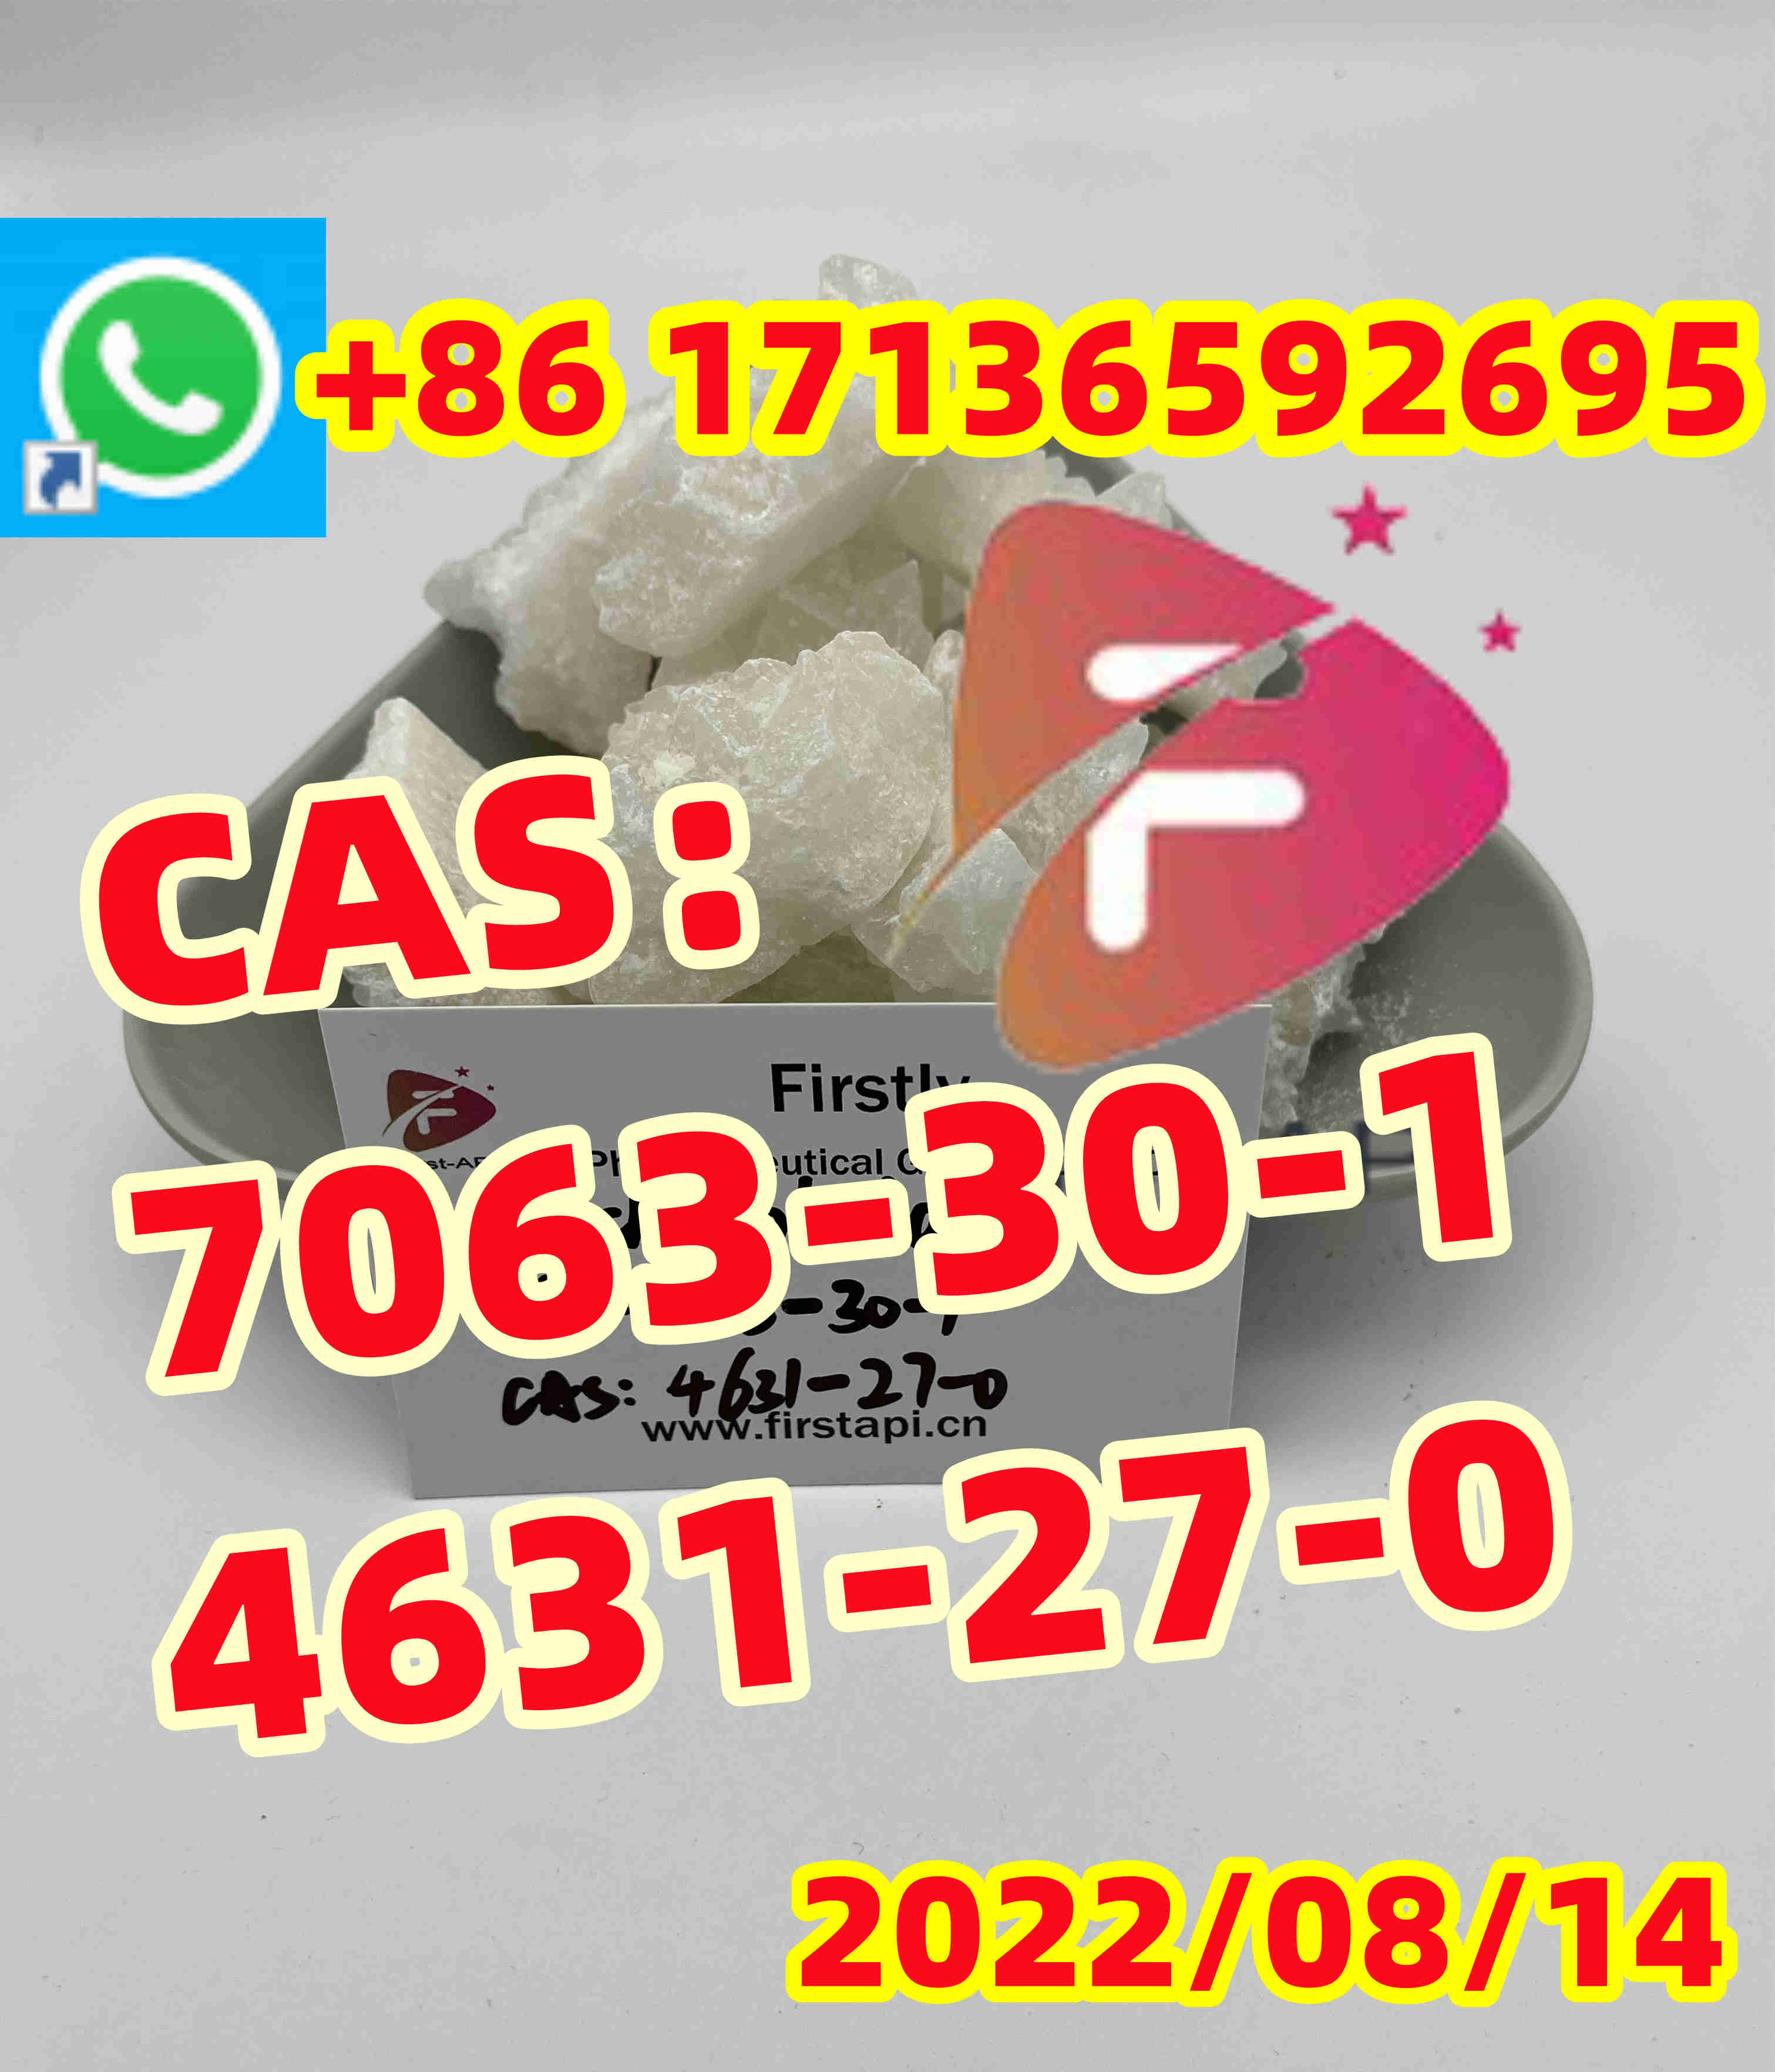 CAS:7063-30-1,,4631-27-0,hydrochloride,high quality,low price, - photo